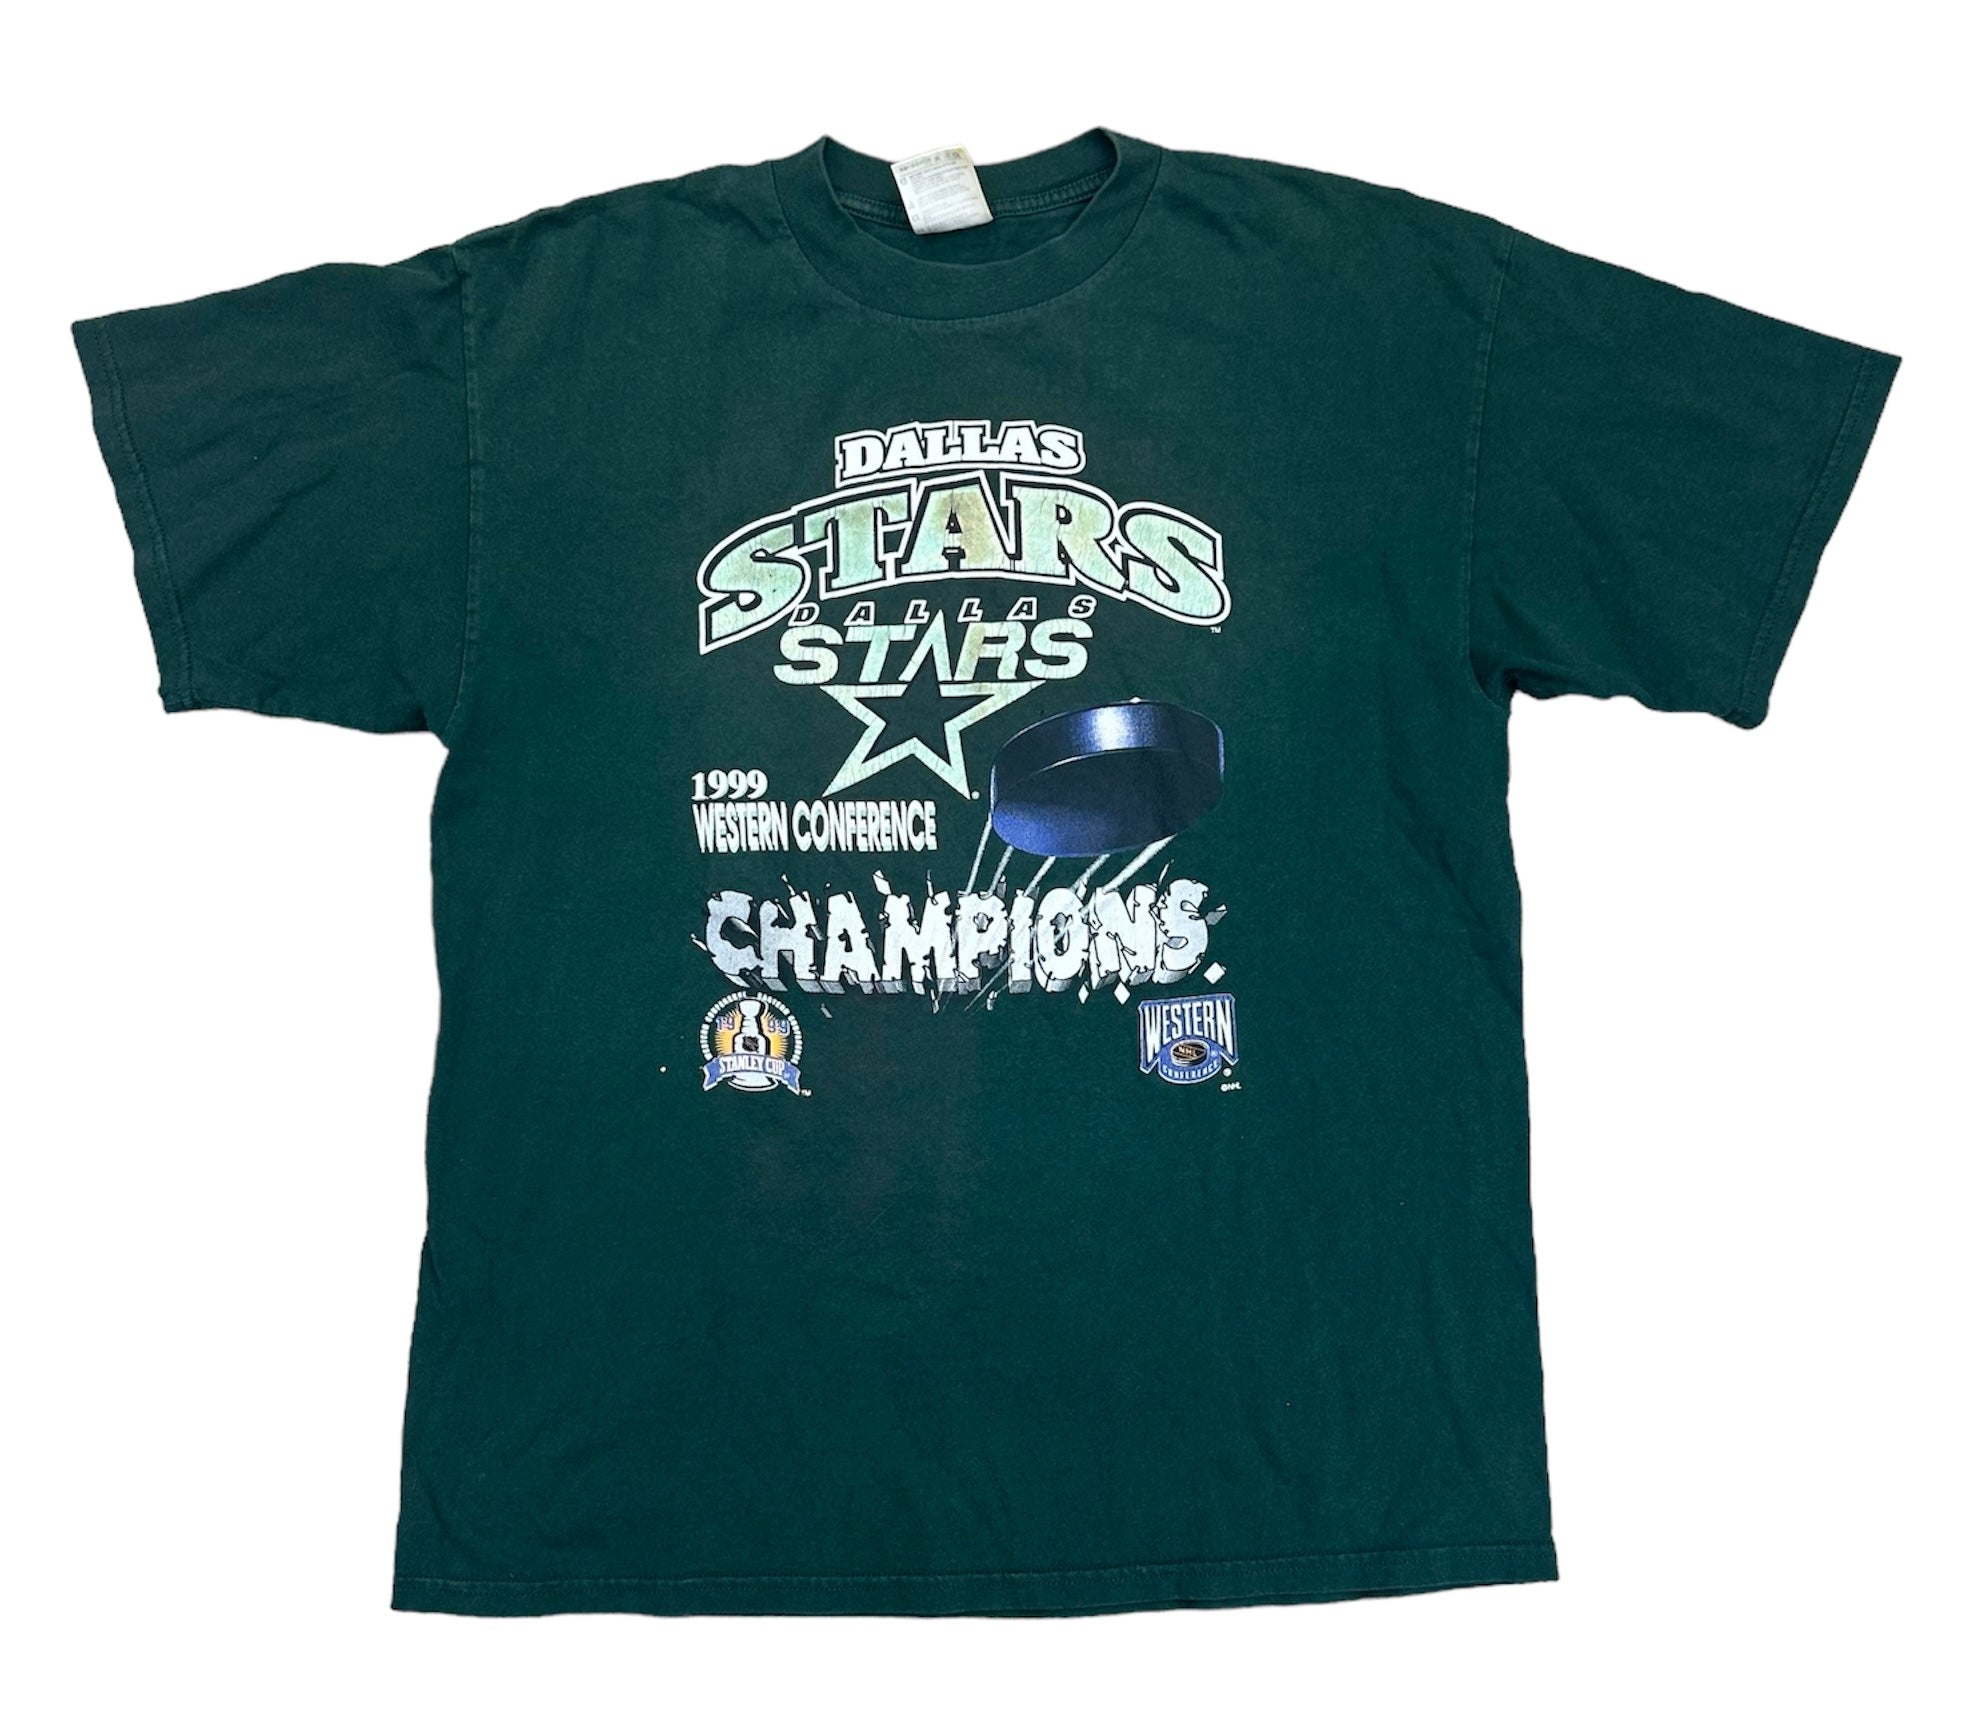 1999 DALLAS STARS WESTERN CONFERENCE CHAMPS TEE (LR)